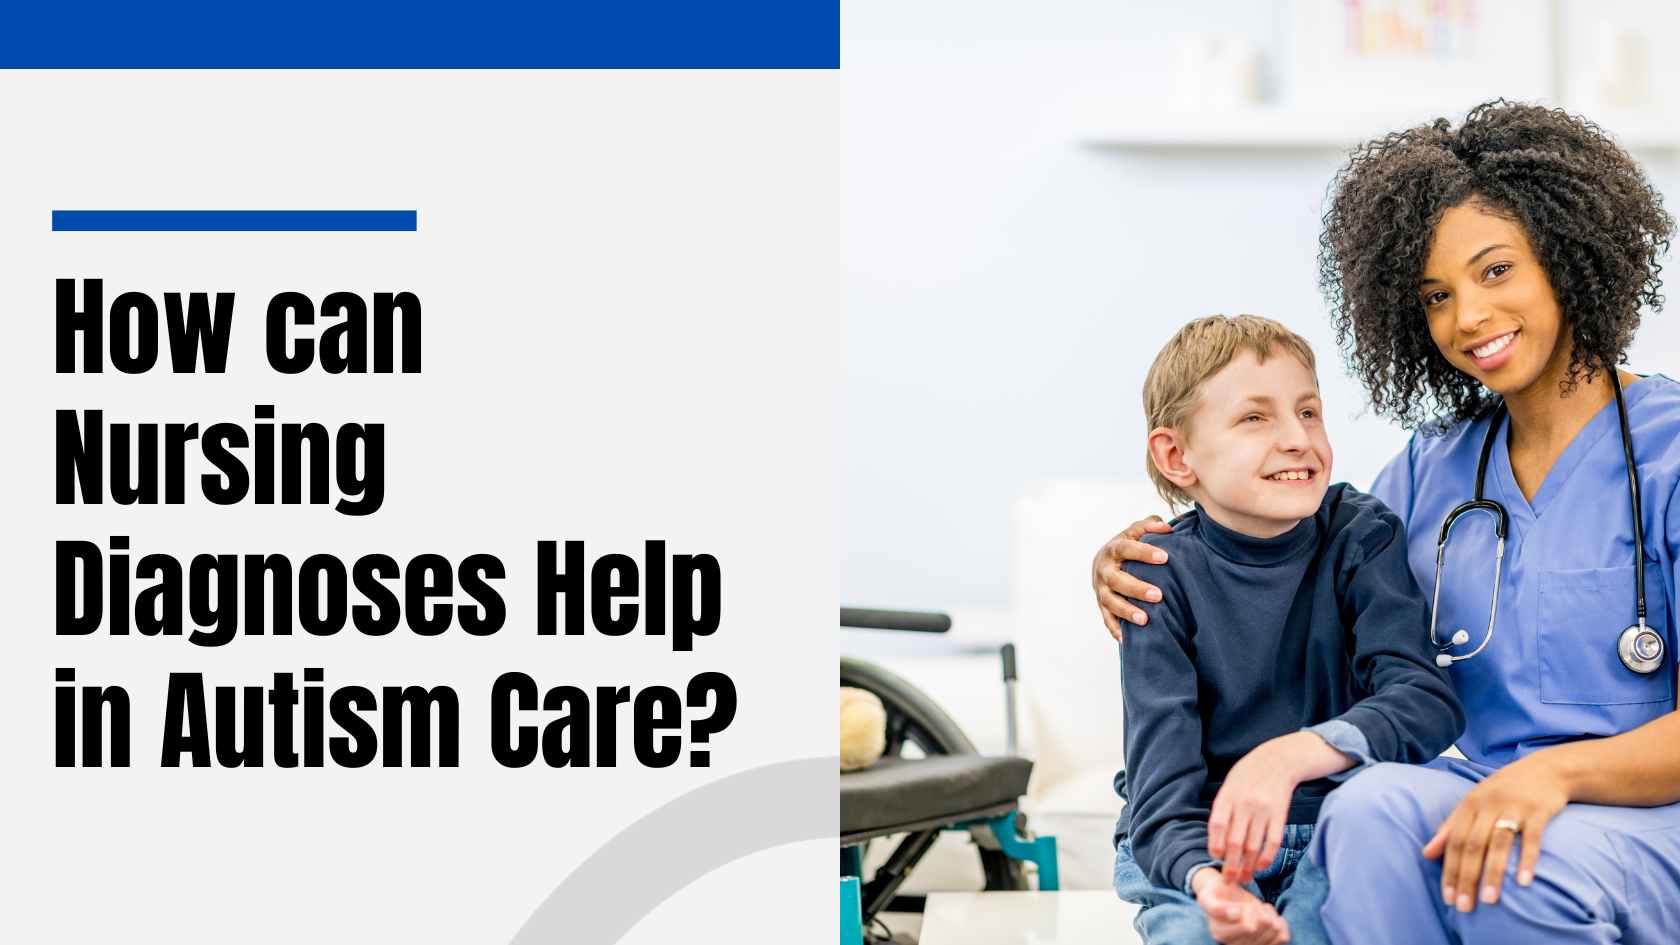 How can Nursing Diagnoses Help in Autism Care?